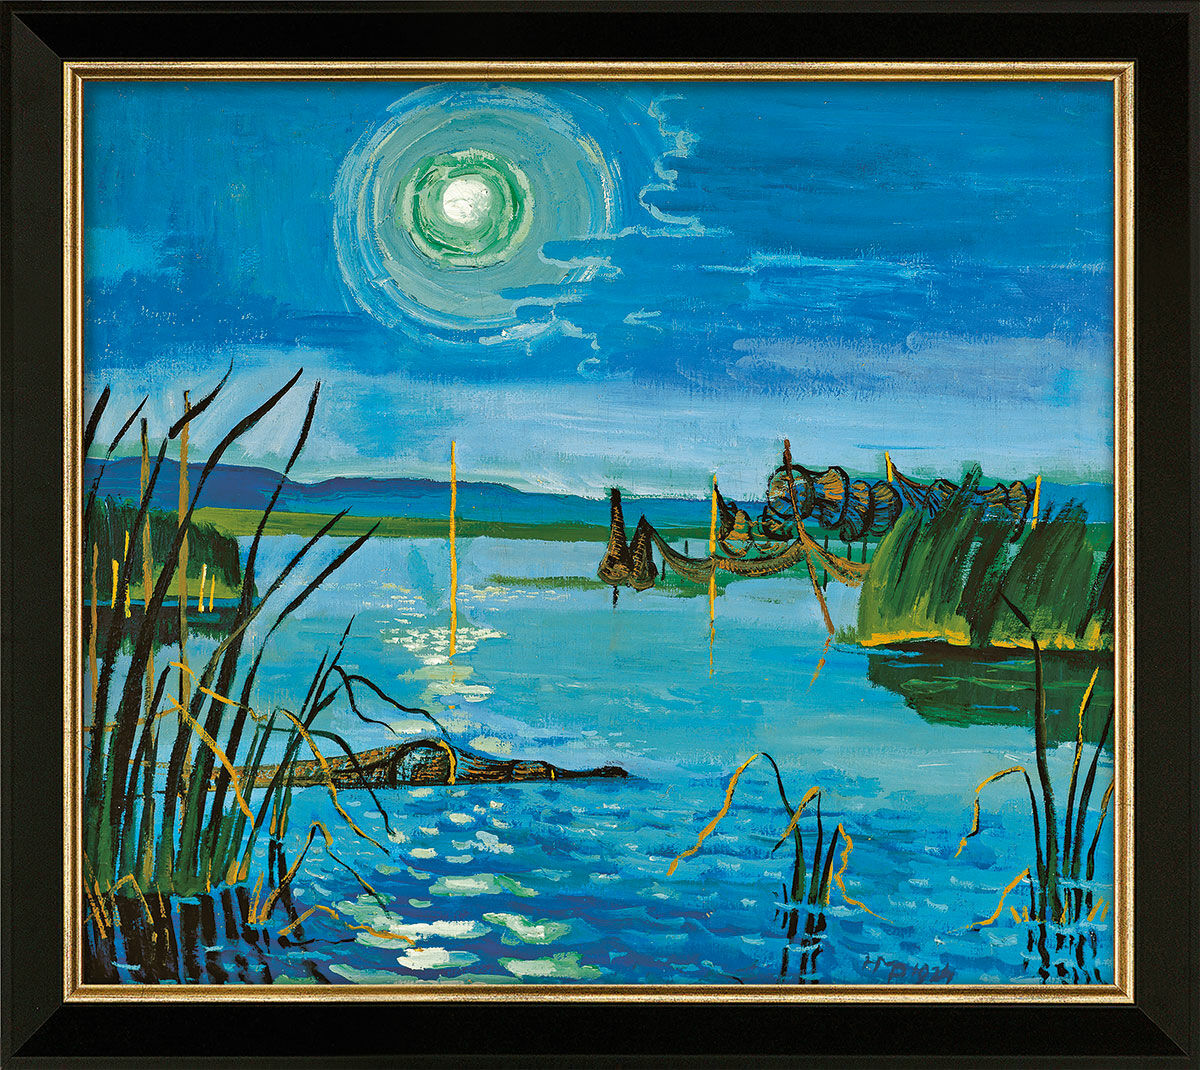 Picture "At Lake Garder" (1924), black and golden framed version by Max Pechstein